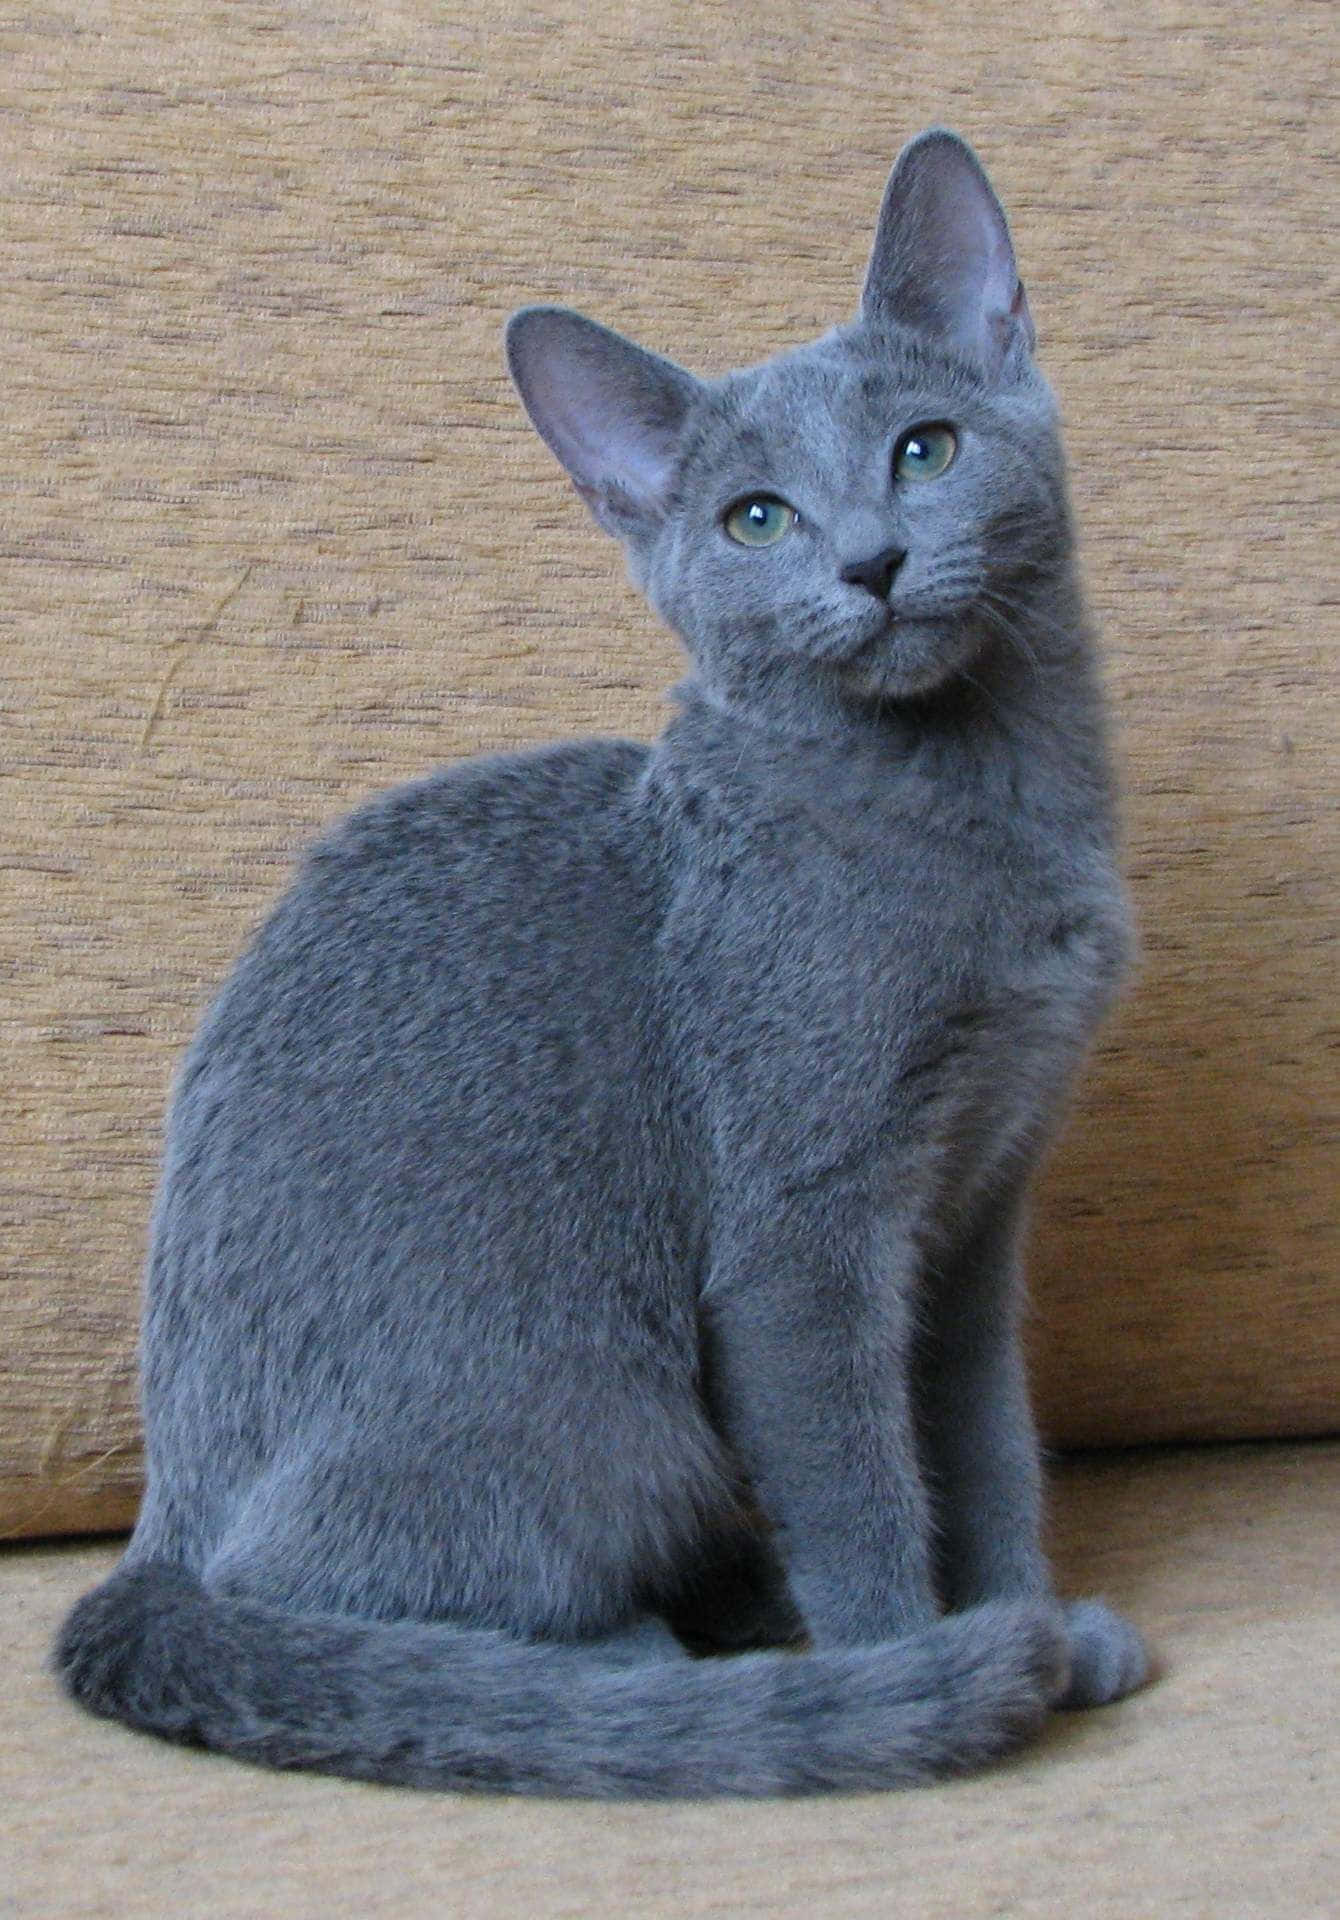 A Gray Cat Sitting On A Couch